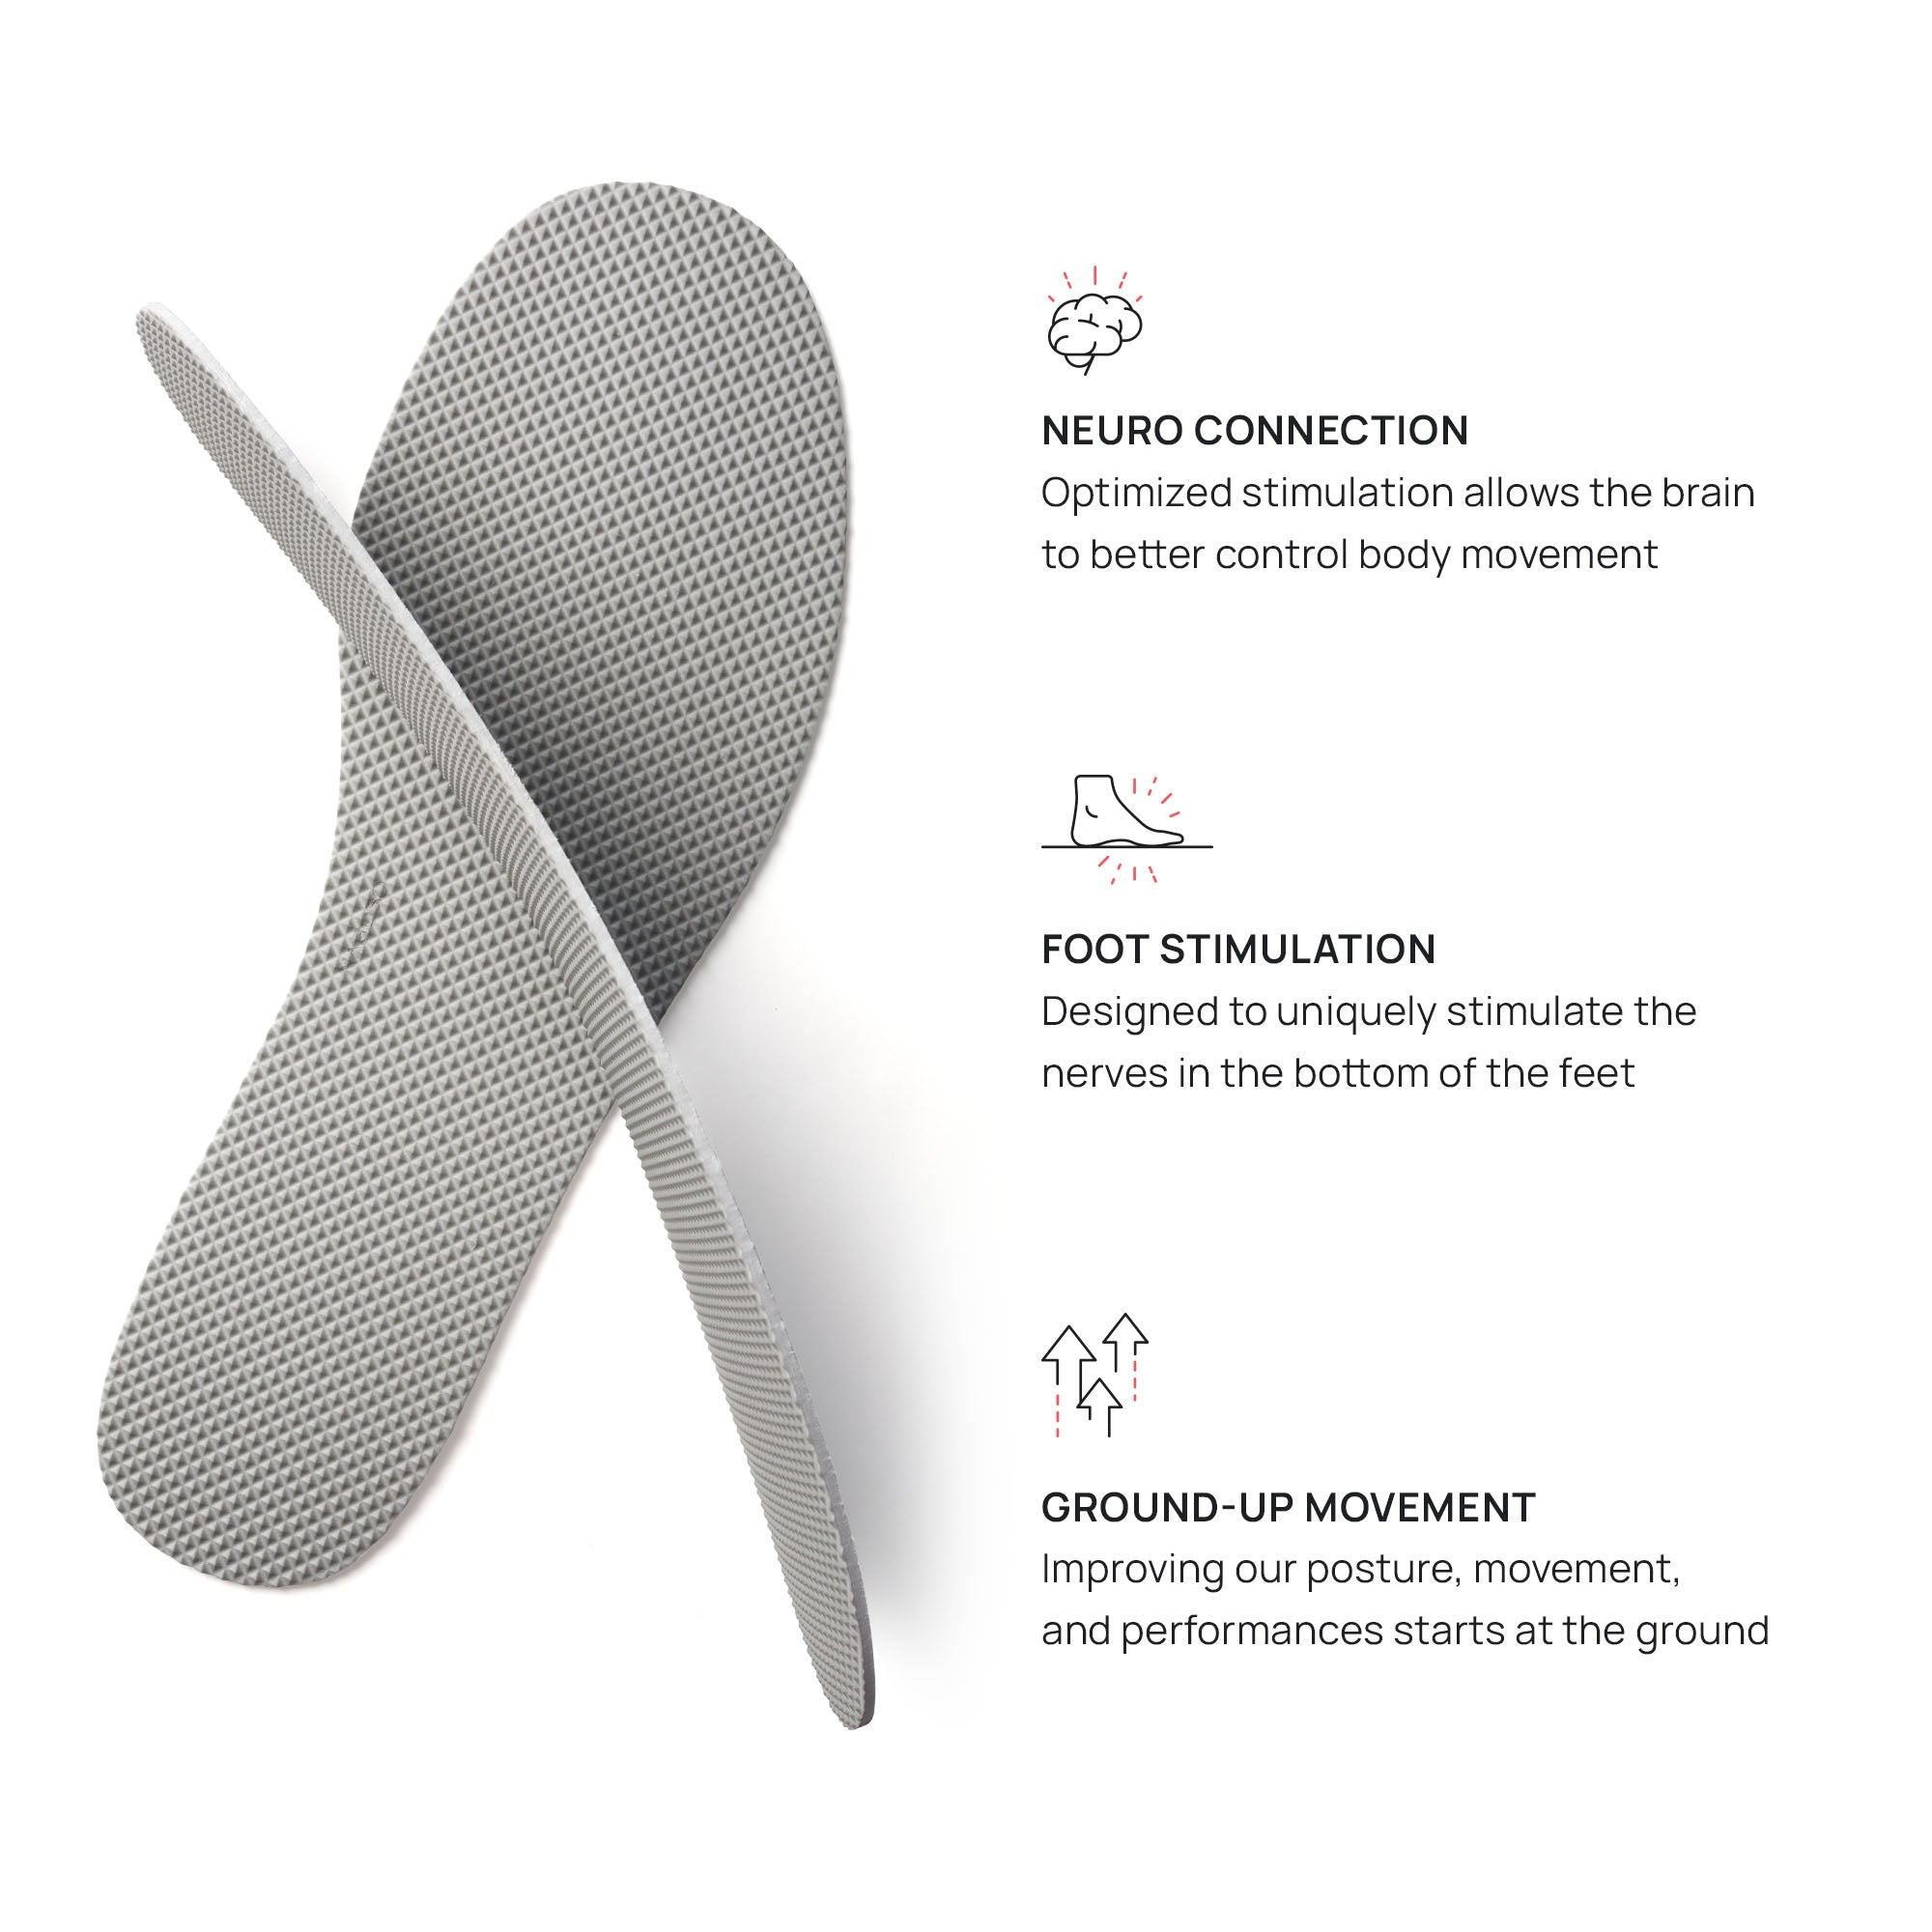 Two grey Naboso Neuro Insoles along with 3 icons demonstrating the different ways the Neuro Insole is stimulating: 1. Neuro Connection allowing the brain to better control body movement 2. Stimulating the nerves on the bottom of the feet 3. Posture improvement beginning from the ground up